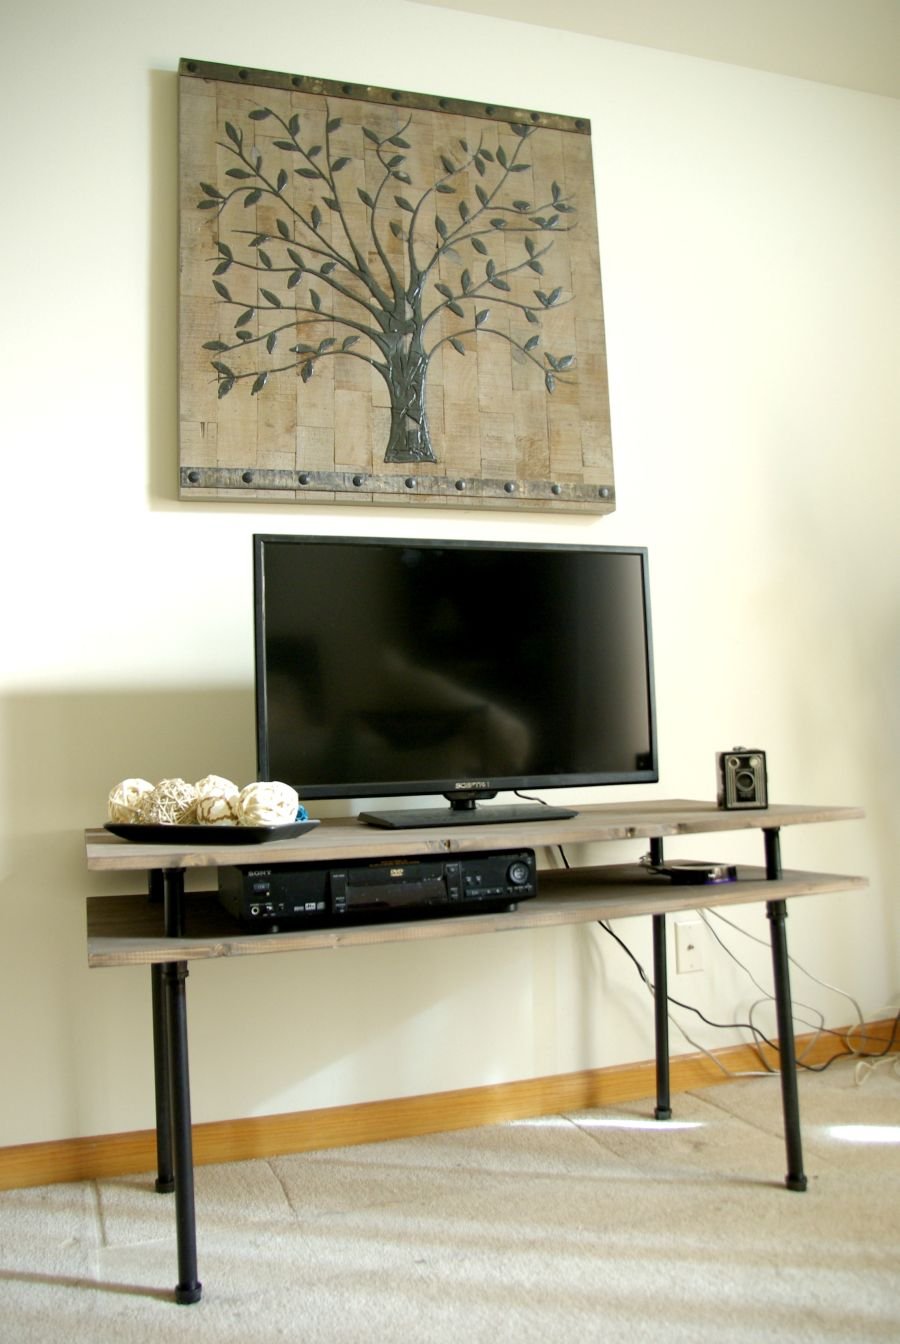 13 Diy Plans For Building A Tv Stand Guide Patterns